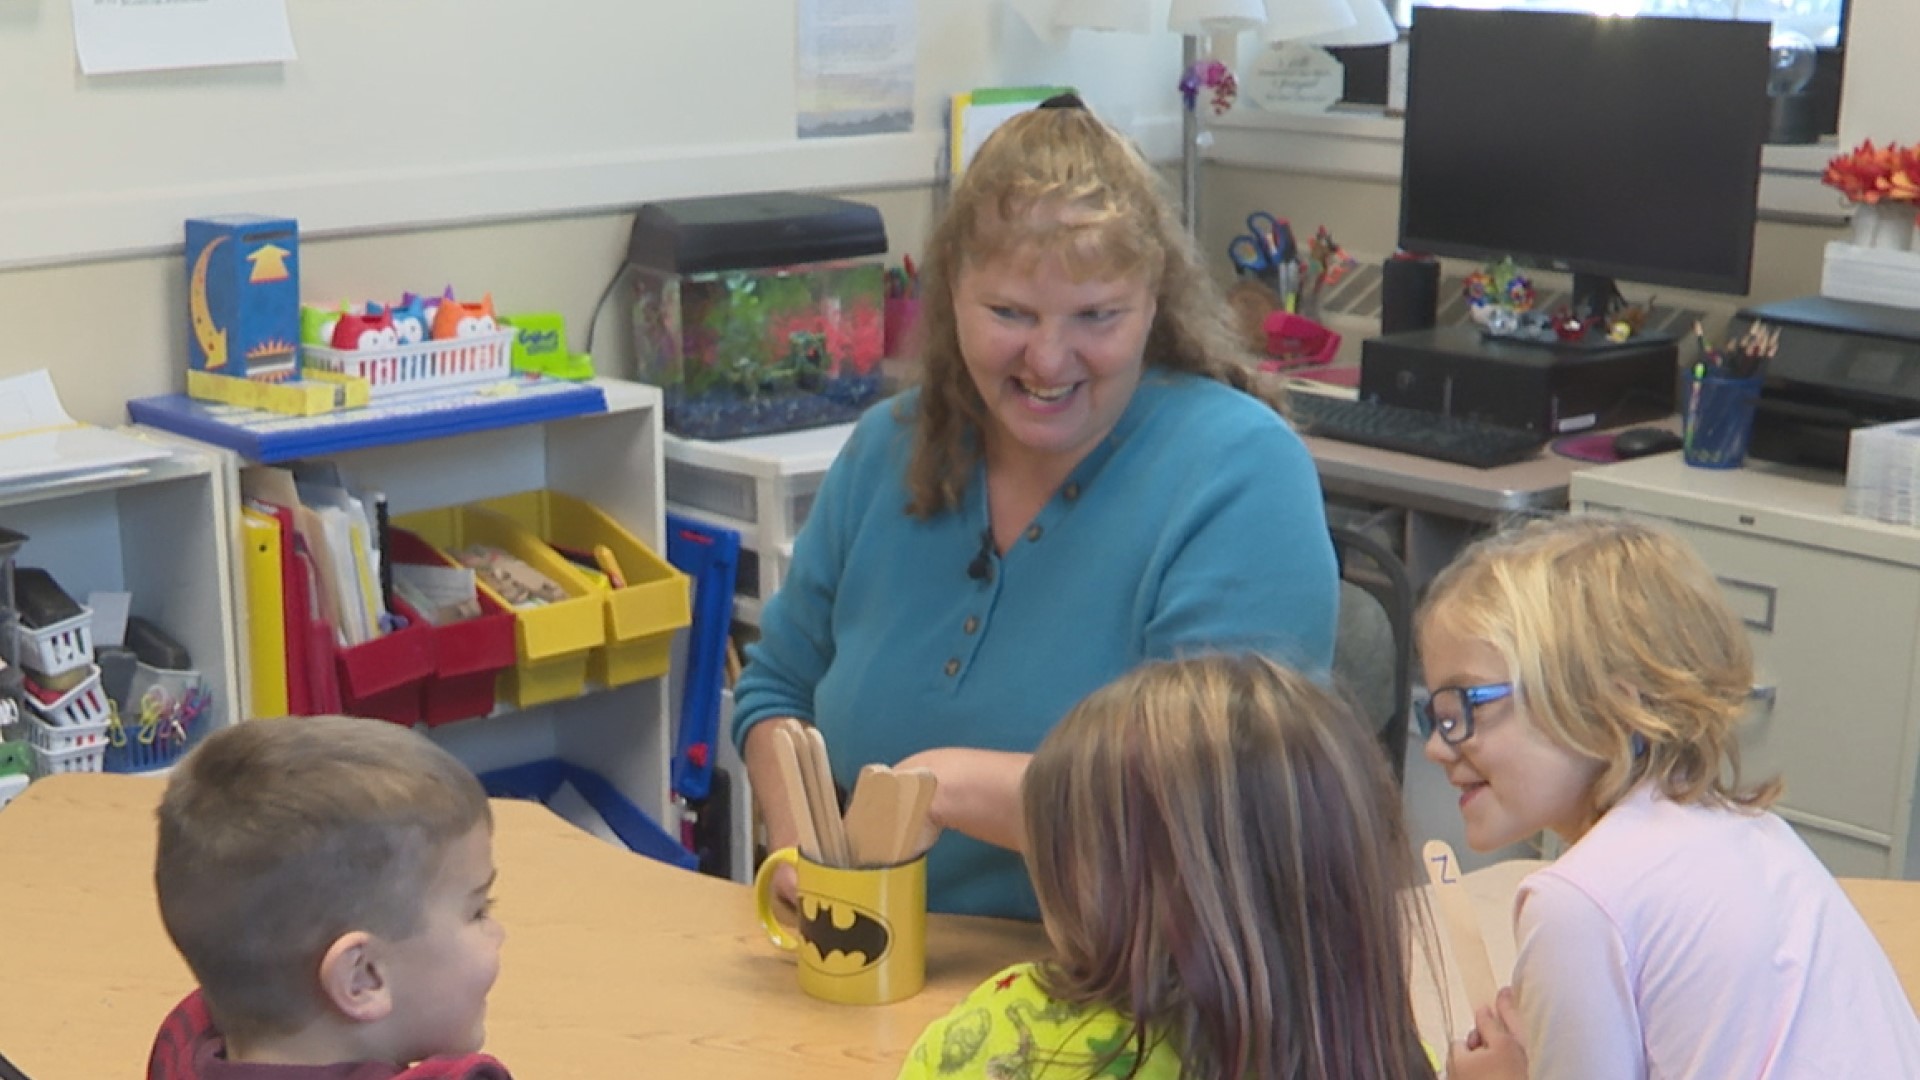 Our next Teacher of the Week retired after some 20 years with Fremont Public Schools. Now, she's in her 31st year of teaching because she just couldn’t stay away.